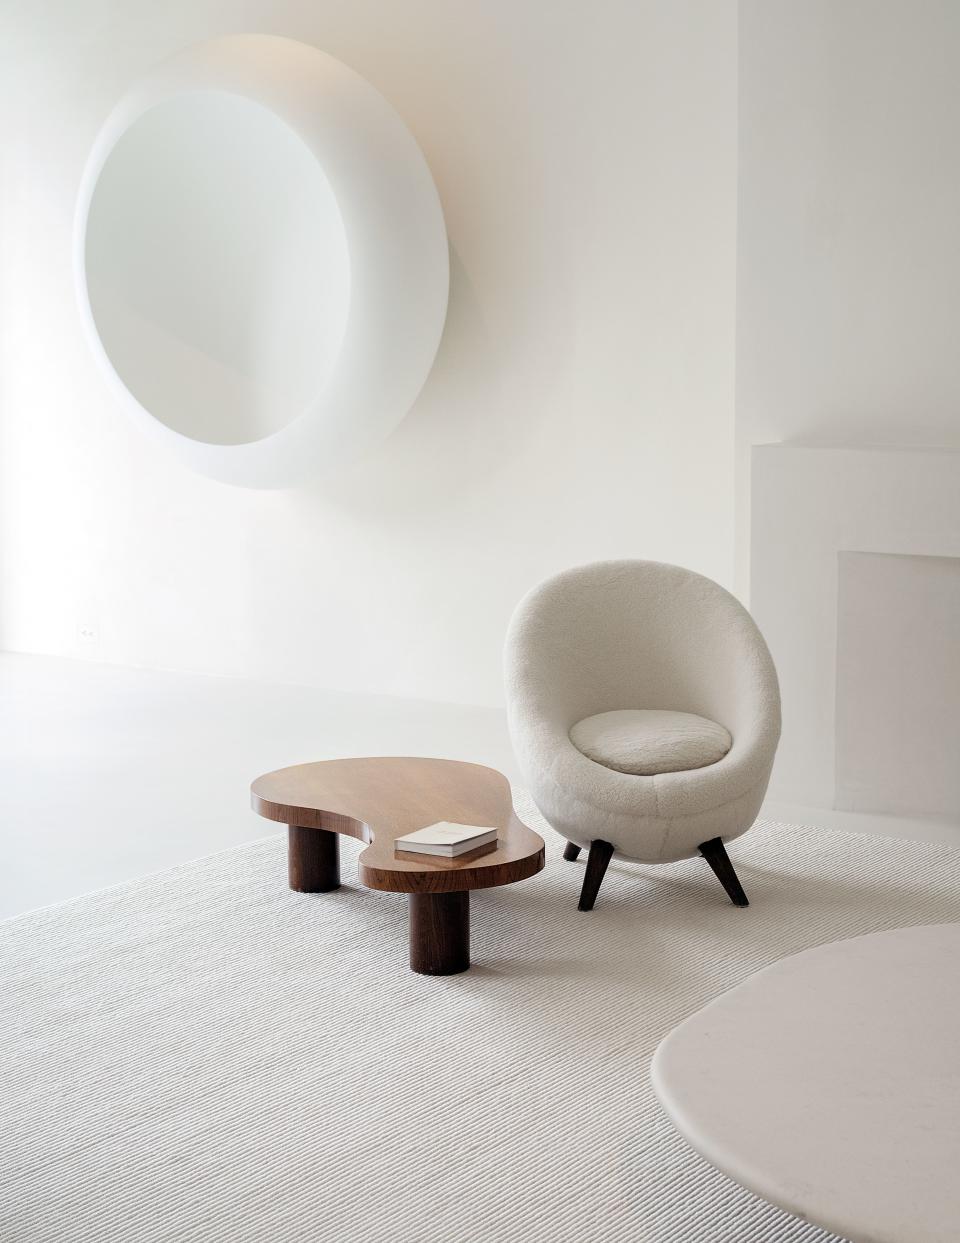 A Jean Royère chair and table in the living room. On wall, Anish Kapoor fiberglass sculpture.